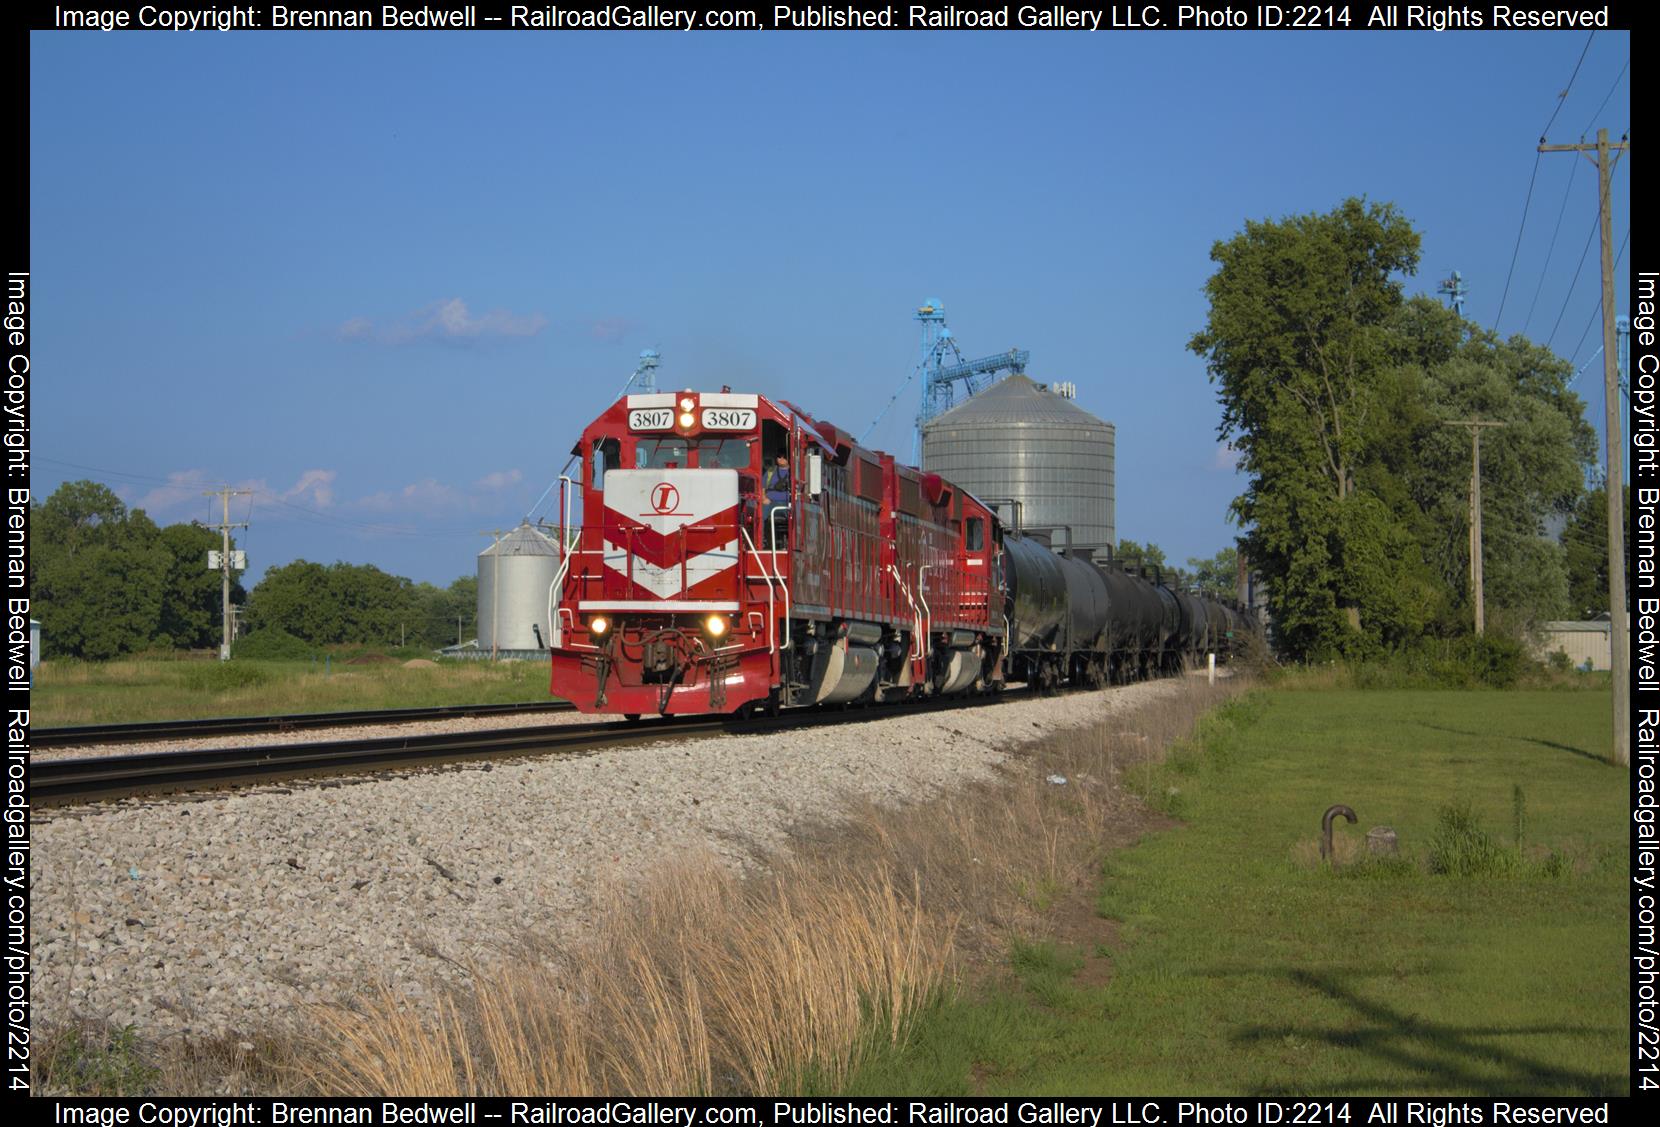 INRD 3807 is a class GP38-2 and  is pictured in Palestine, Illinois, United States.  This was taken along the Indianapolis Subdivision on the Indiana Rail Road. Photo Copyright: Brennan Bedwell uploaded to Railroad Gallery on 07/10/2023. This photograph of INRD 3807 was taken on Monday, July 10, 2023. All Rights Reserved. 